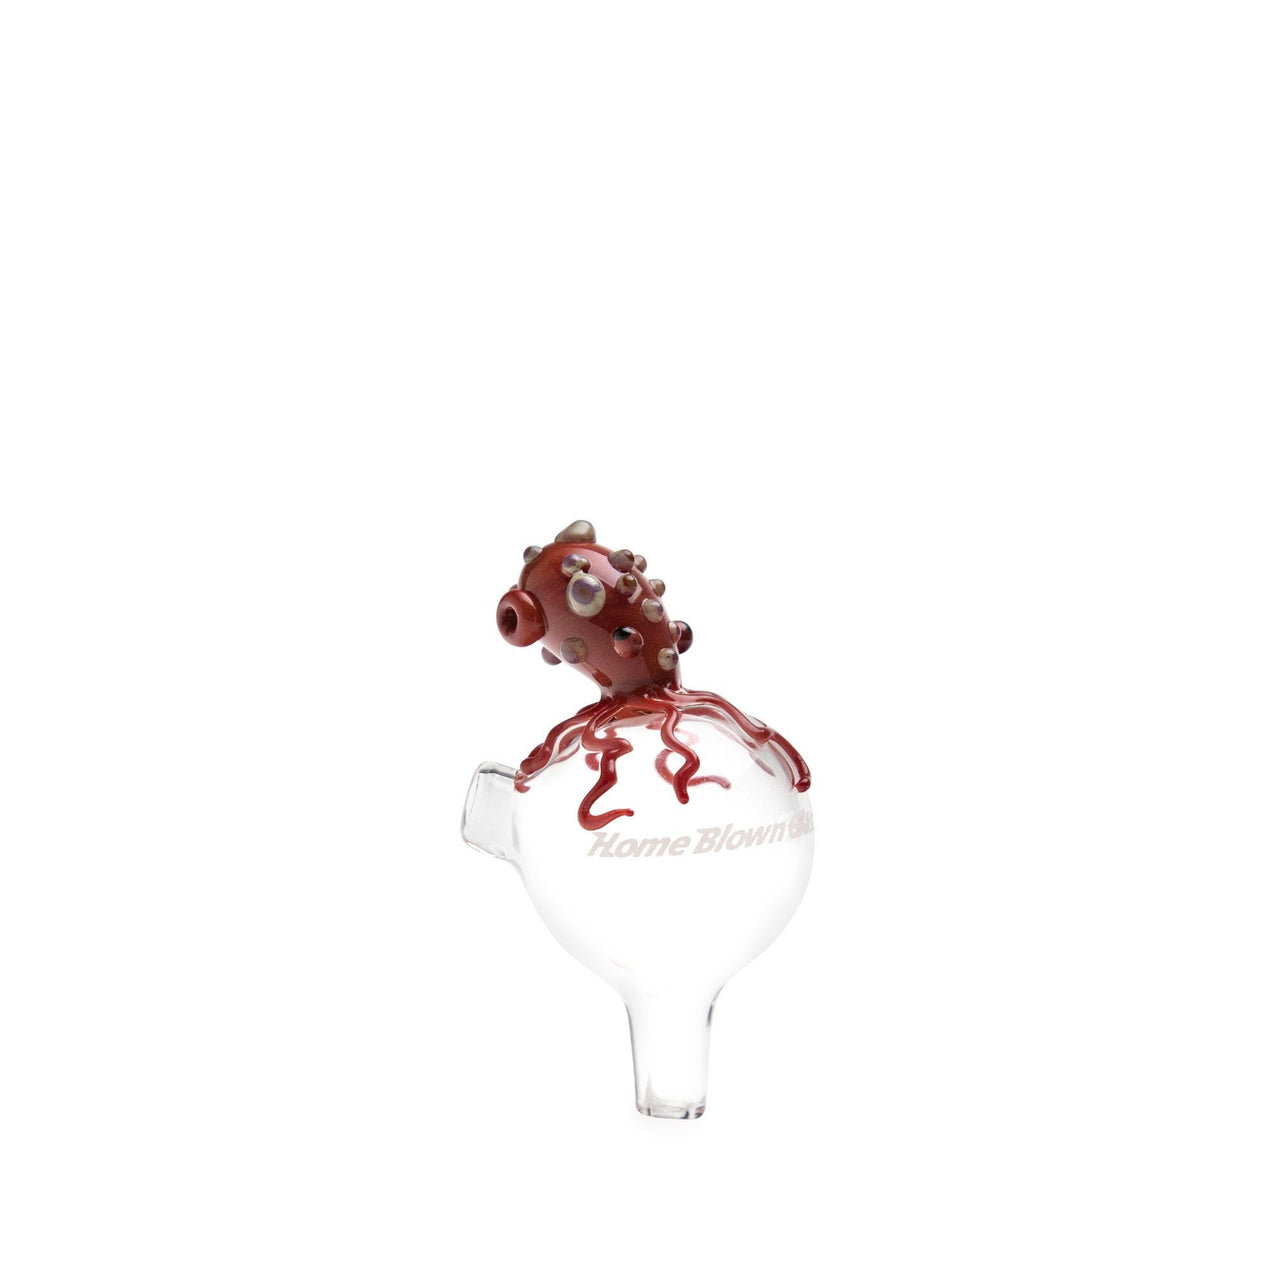 Home Blown Glass Bubble Carb Cap - Octopus - 420 Science - The most trusted online smoke shop.